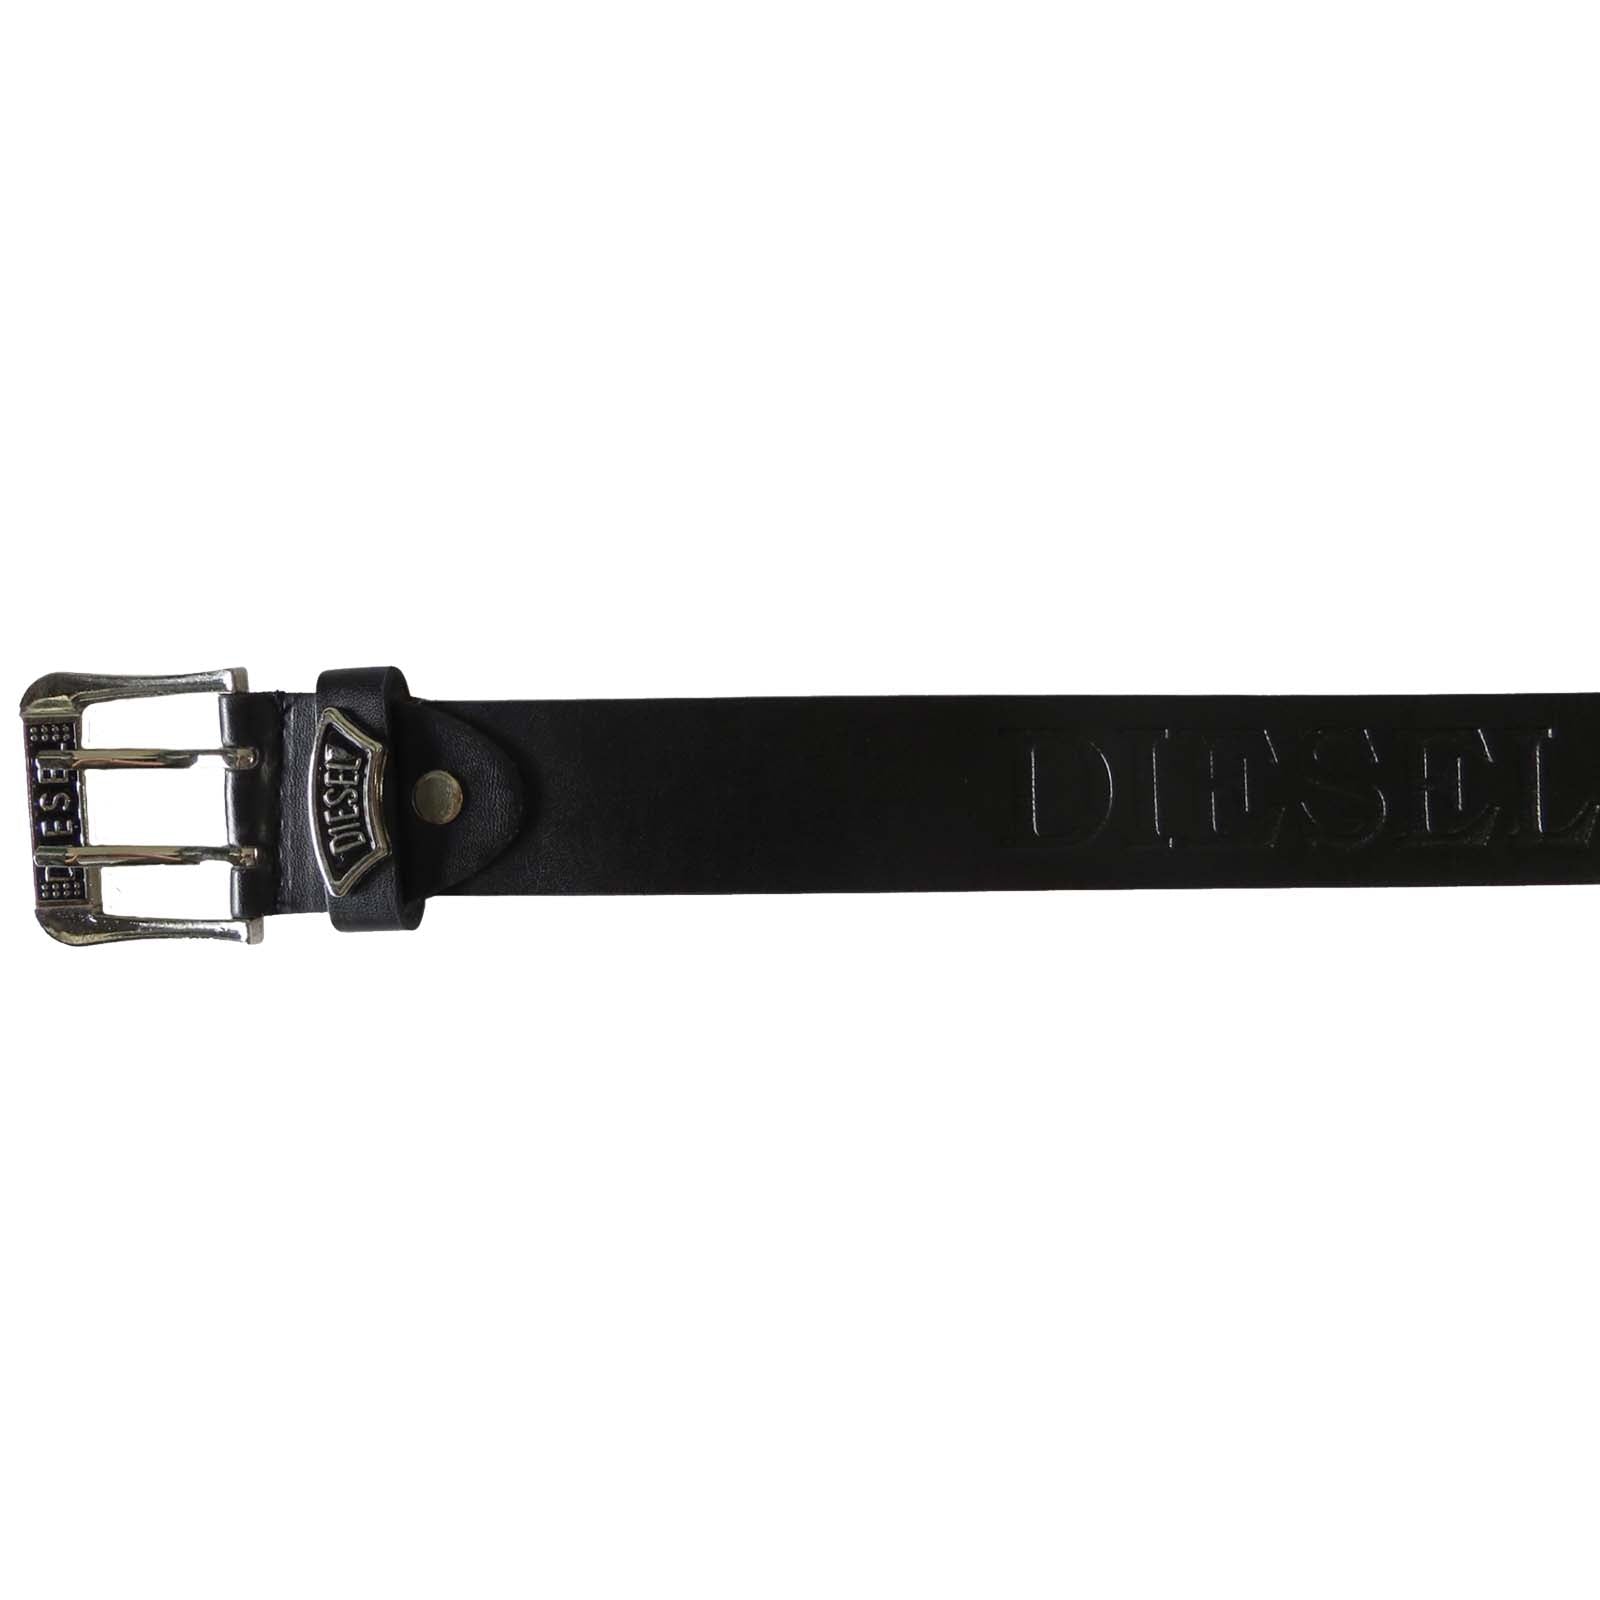 Black leather wholesale belt for men with silver buckle